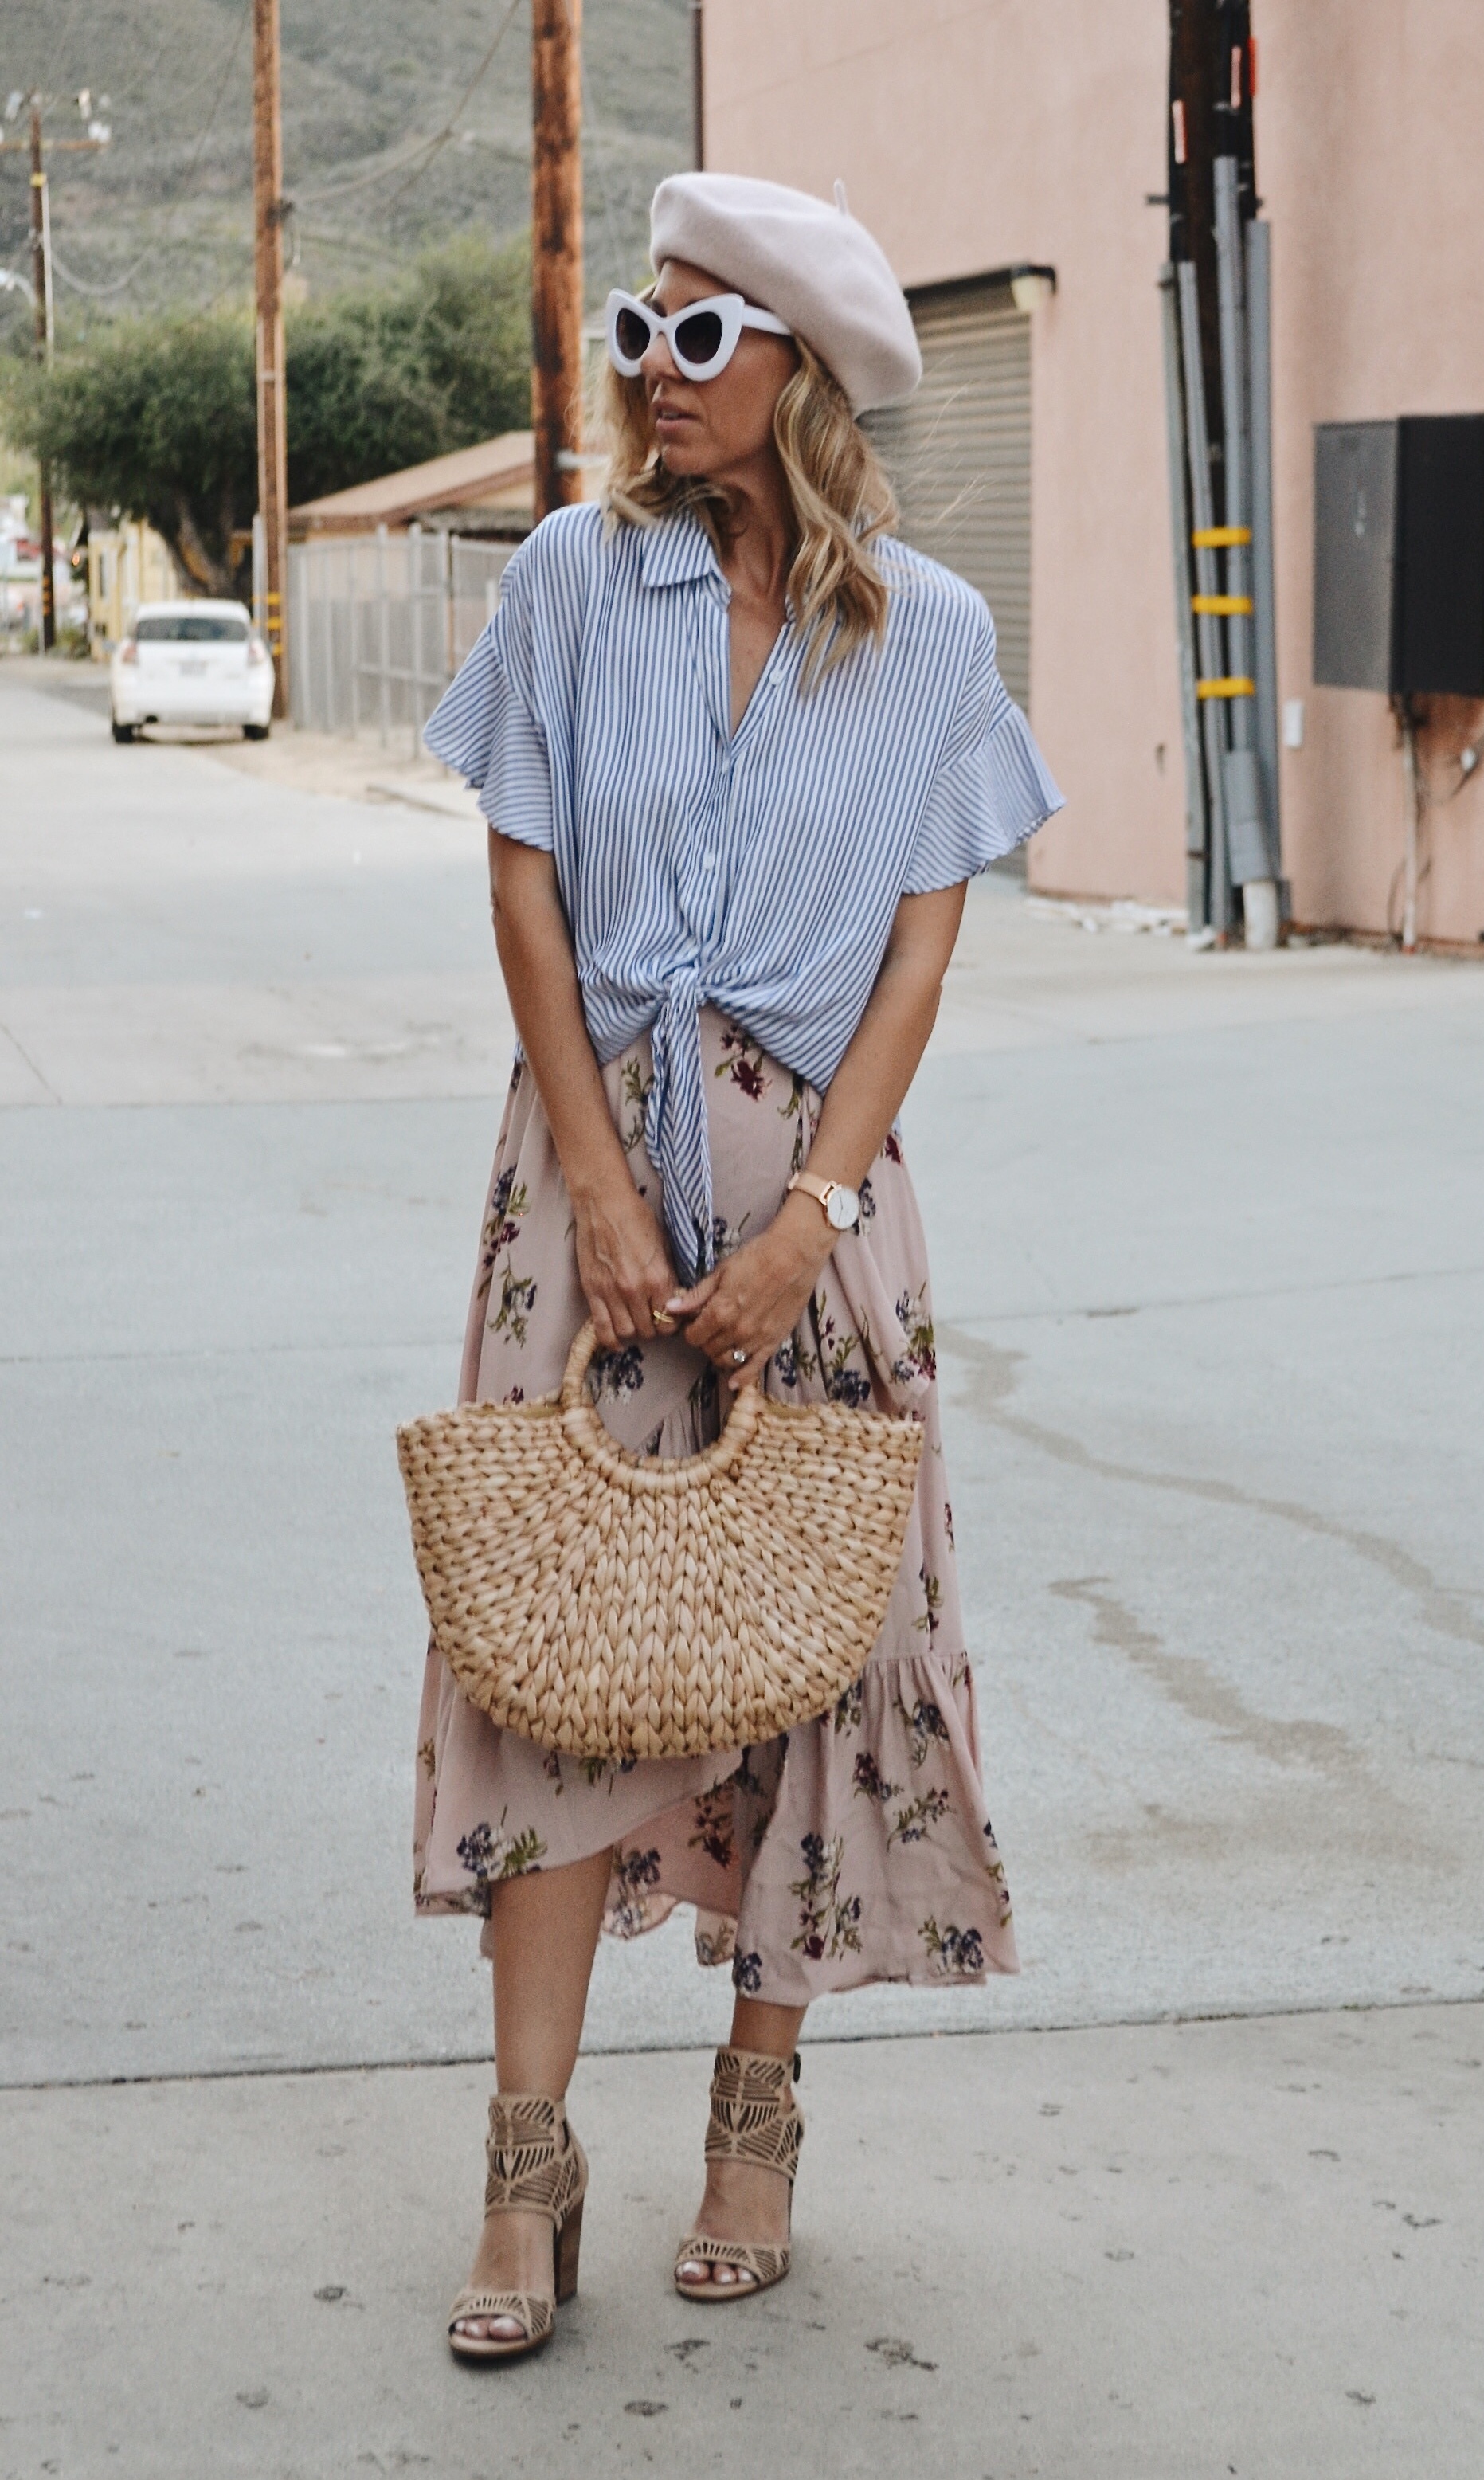 FLORAL + STRIPES - JACLYN DE LEON STYLE + striped top with ruffle sleeve + floral ruffle midi skirt + straw handbag + retro sunglasses + pink beret hat + spring outfit inspiration + street style